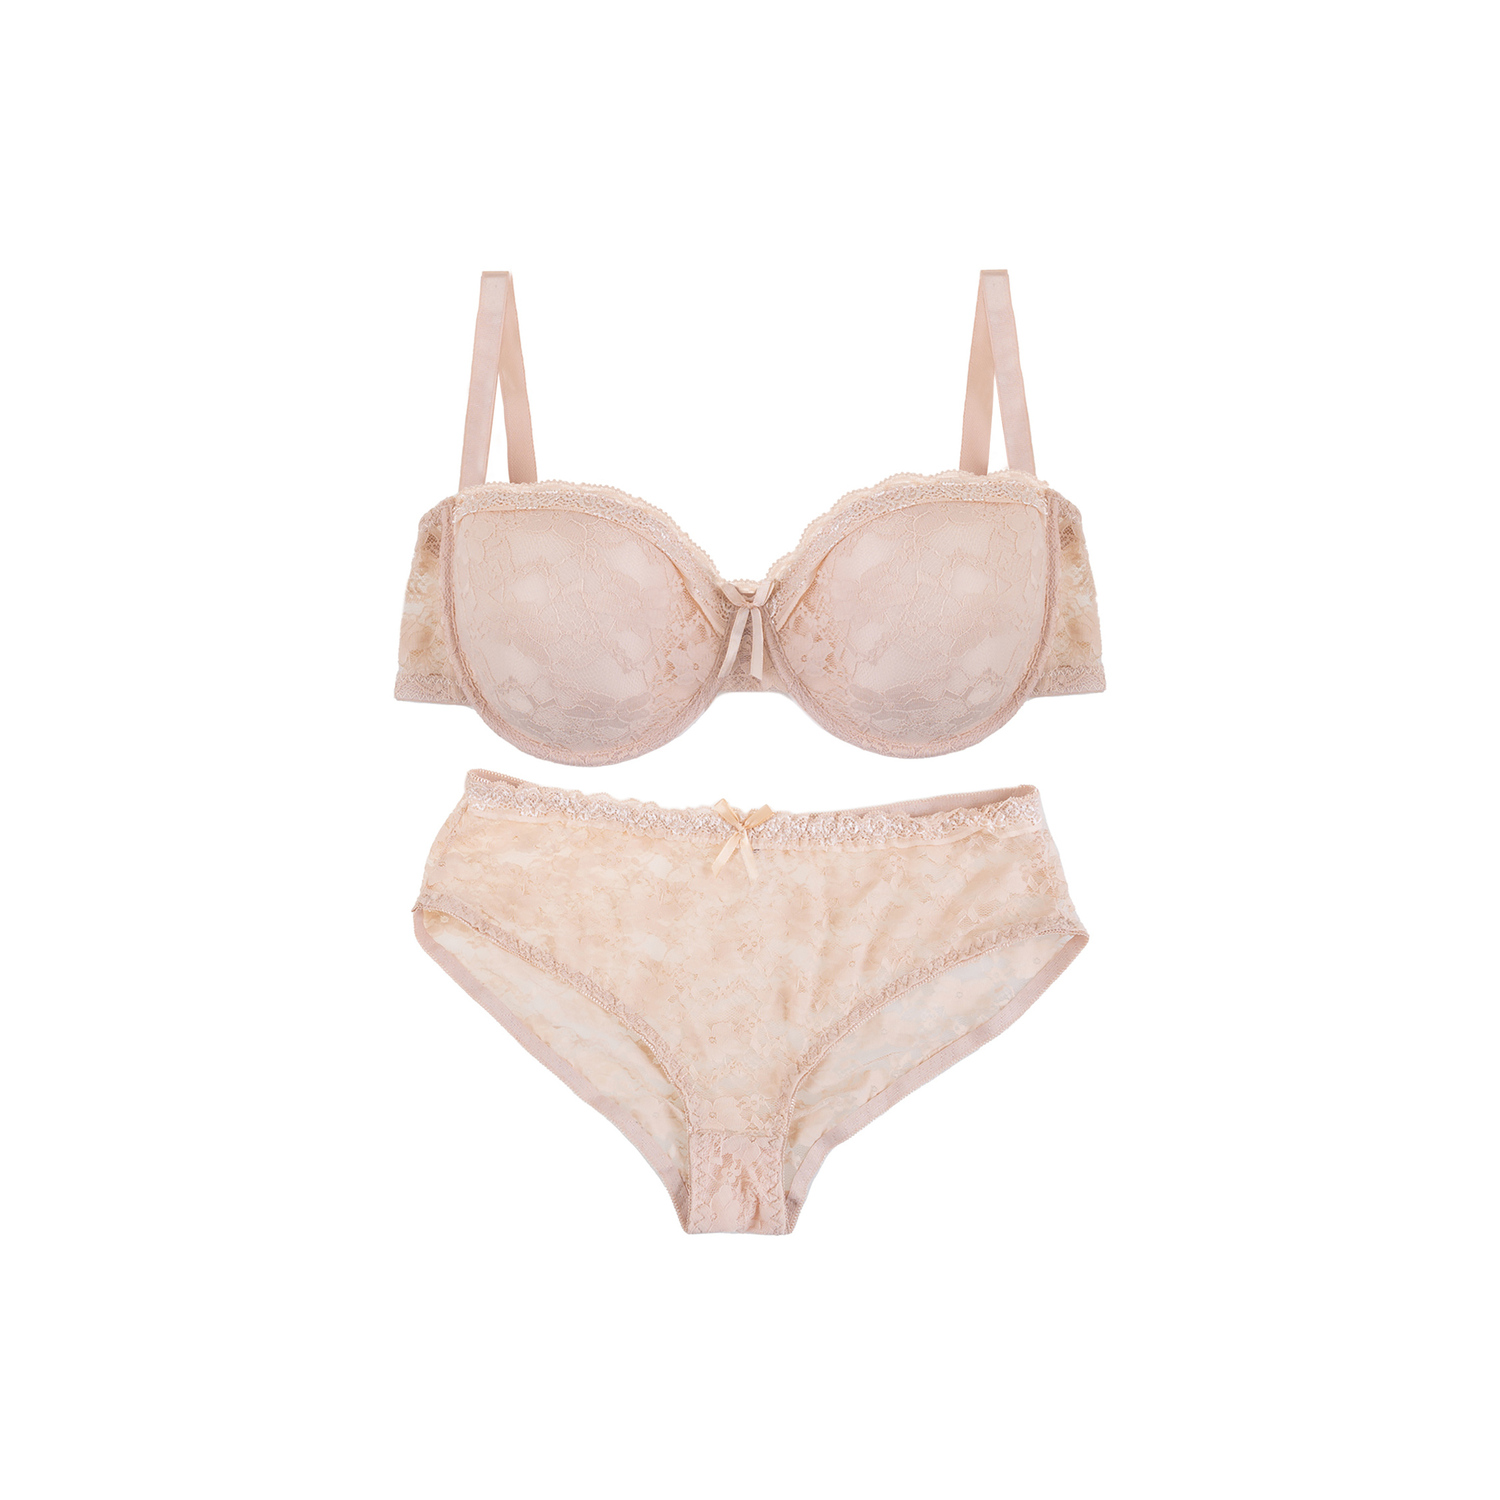 Full coverage lace underwire bra set with cheeky panty, off white - Plus  Size. Colour: off white. Size: 38d/8